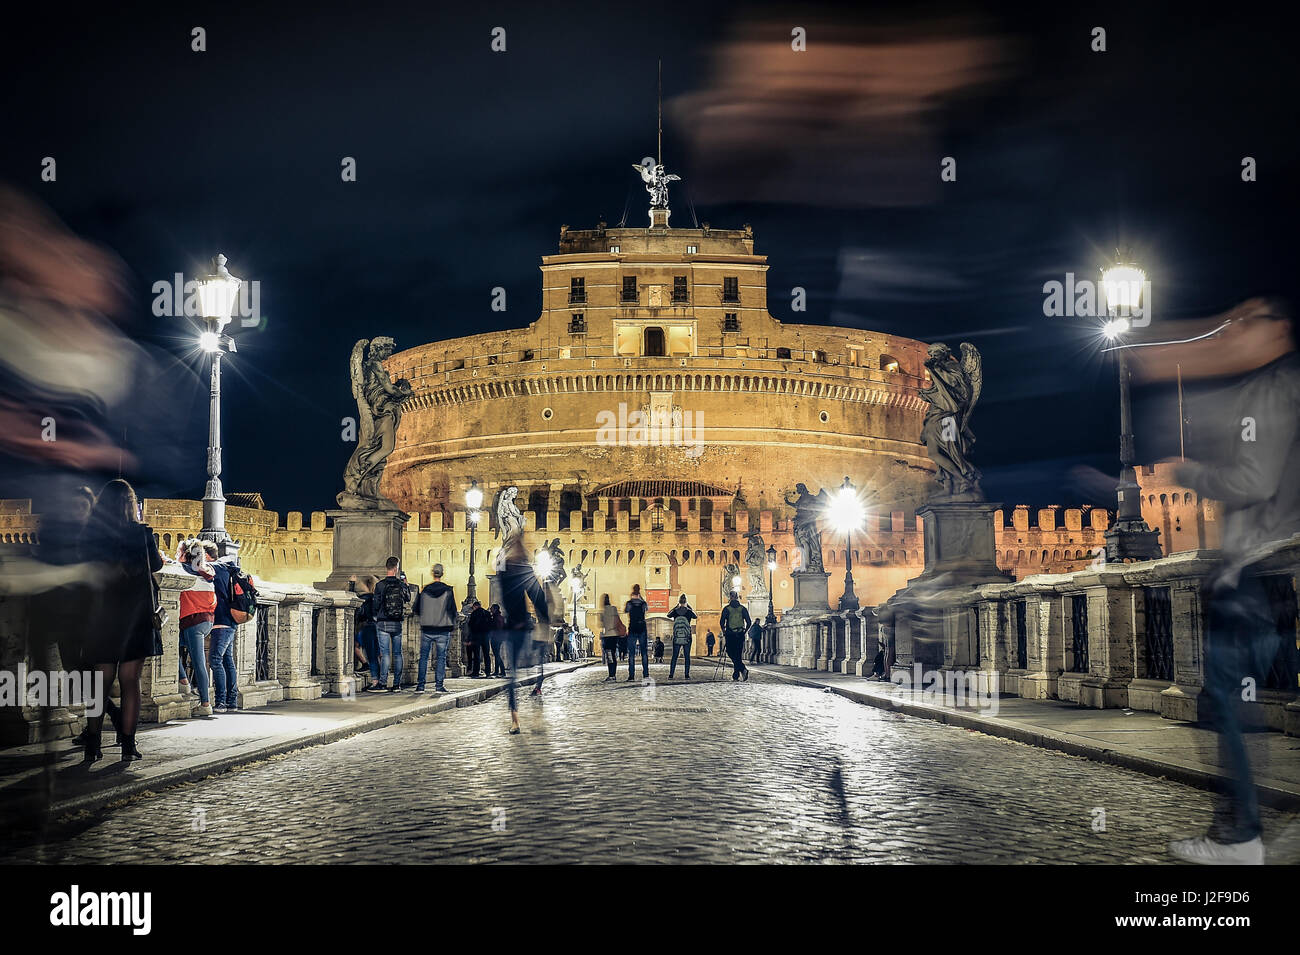 Ponte Sant'Angelo bridge crossing the river Tiber and Castel Sant'Angelo (AD 135), mausoleum of Hadrian, now a museum and art gallery illuminated at n Stock Photo